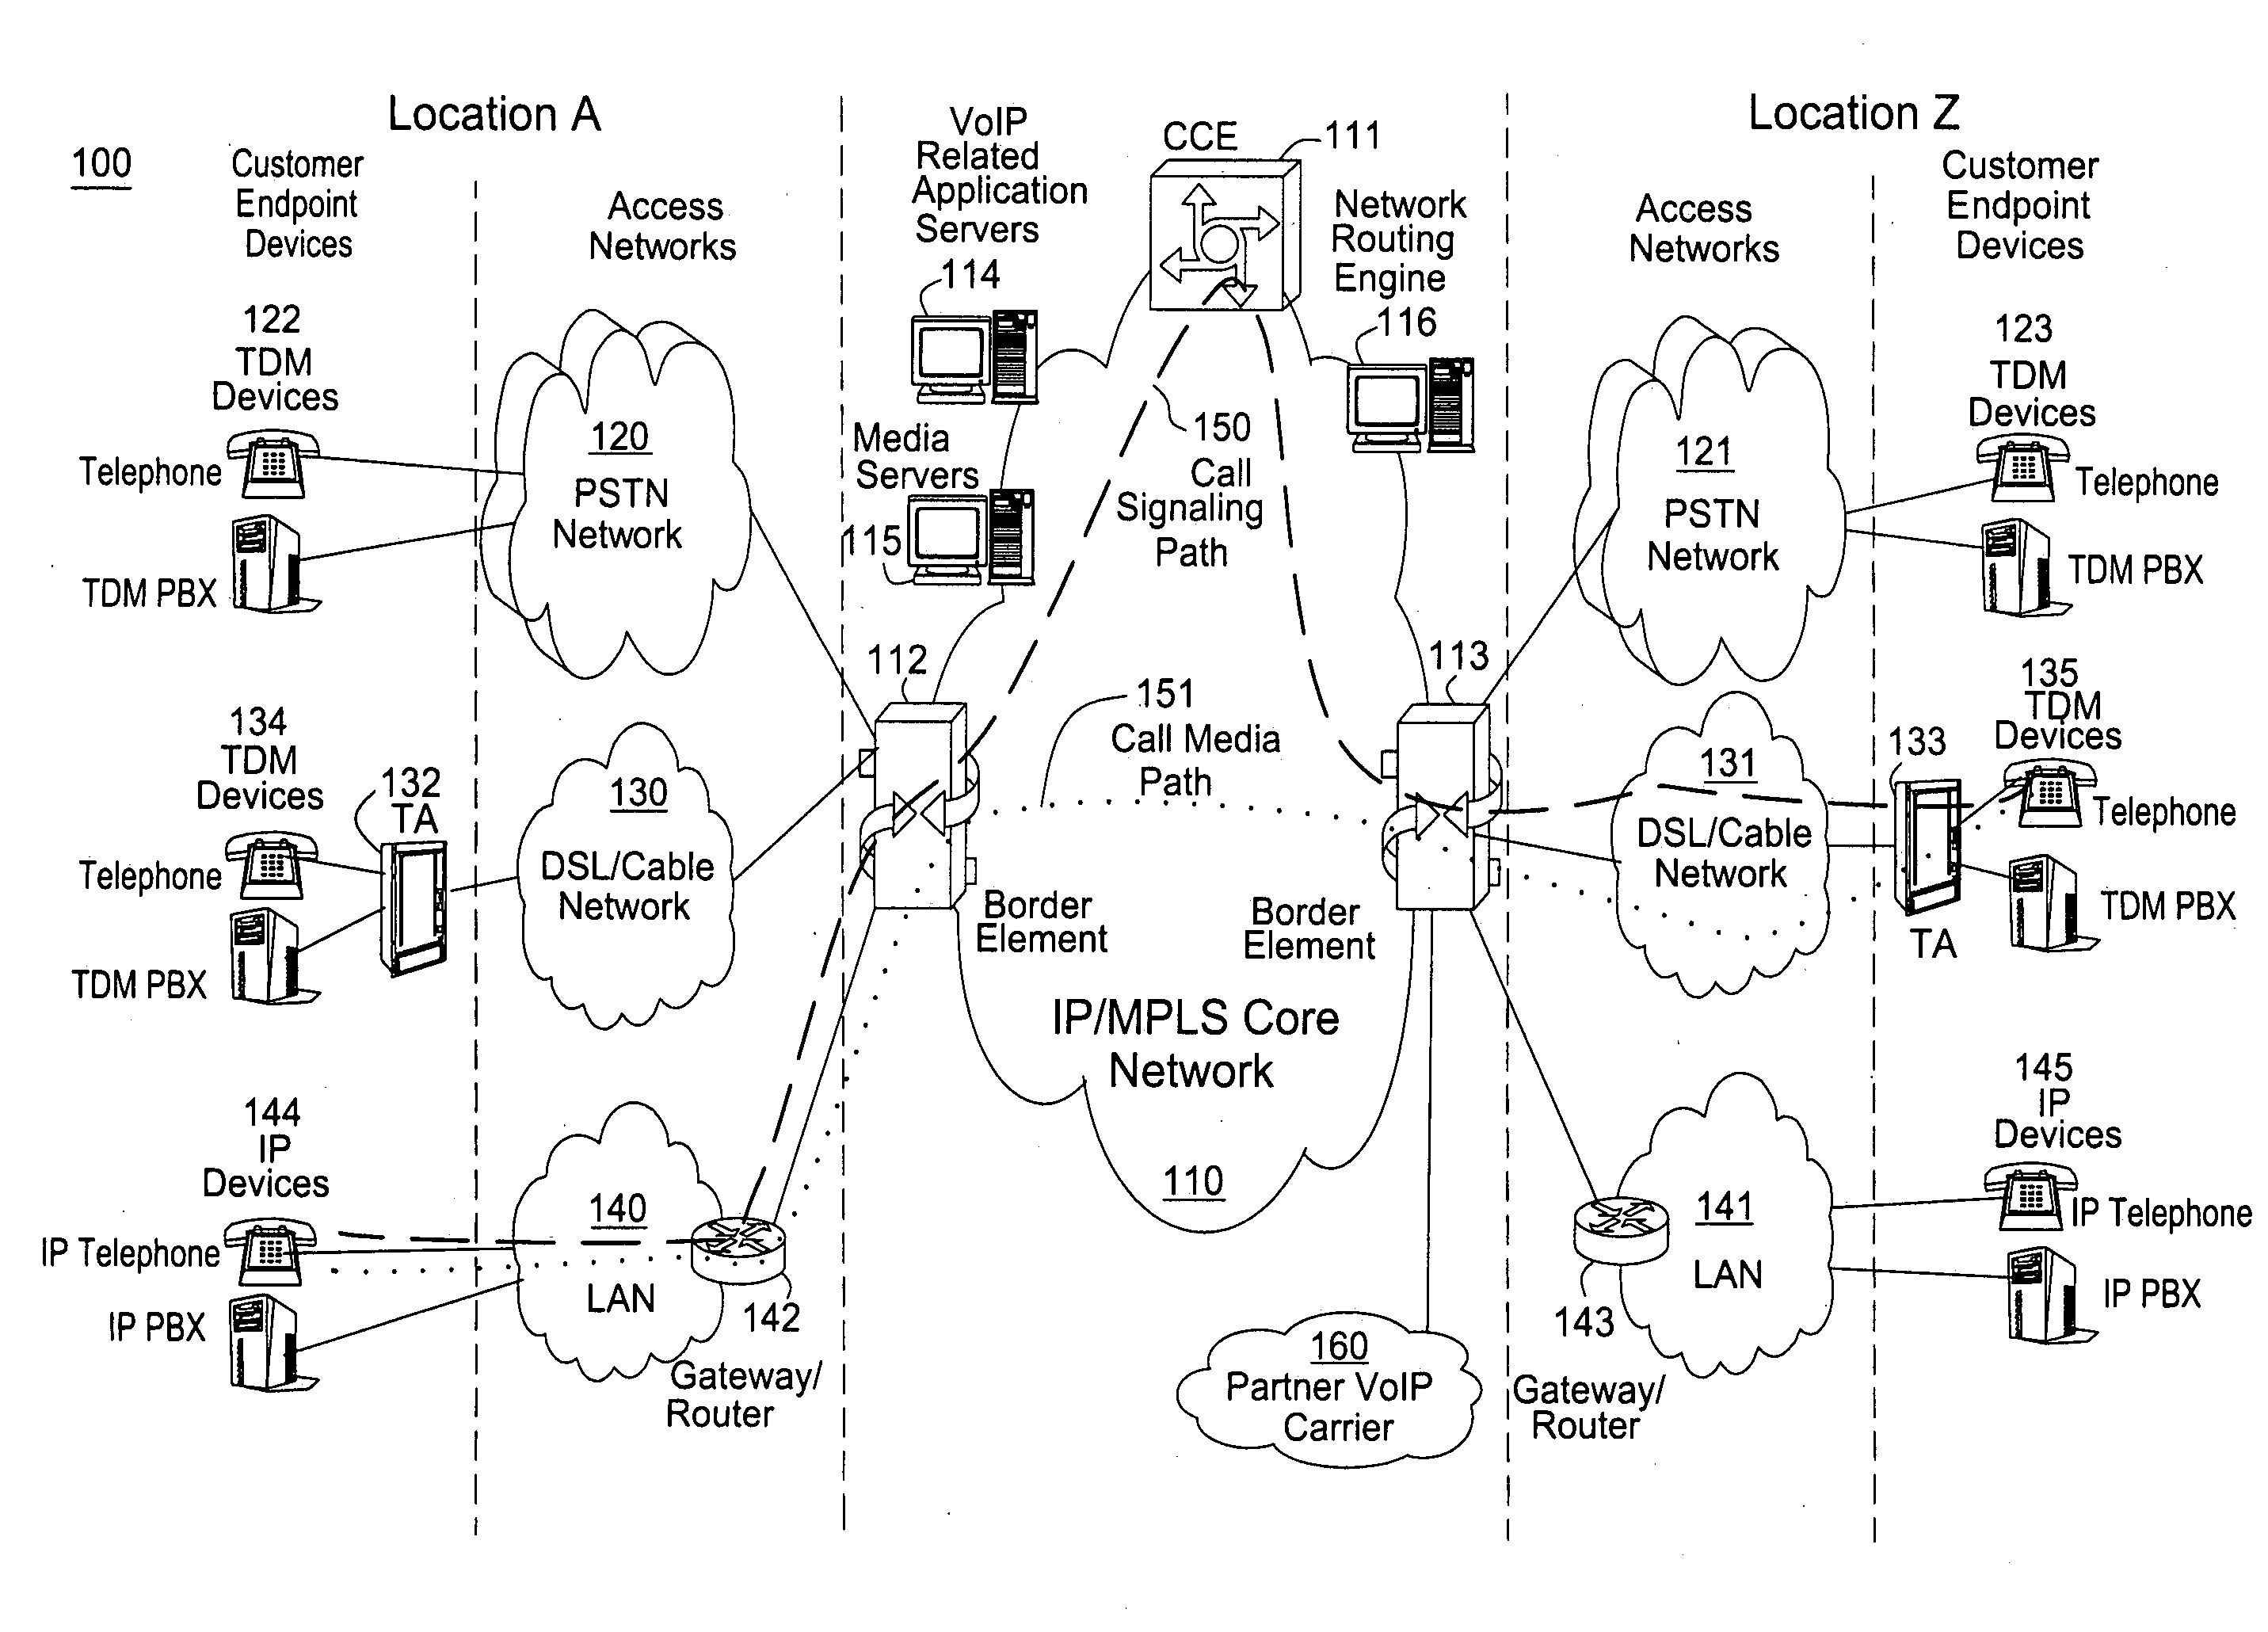 Method and apparatus for providing a click-to-talk service for advertisements